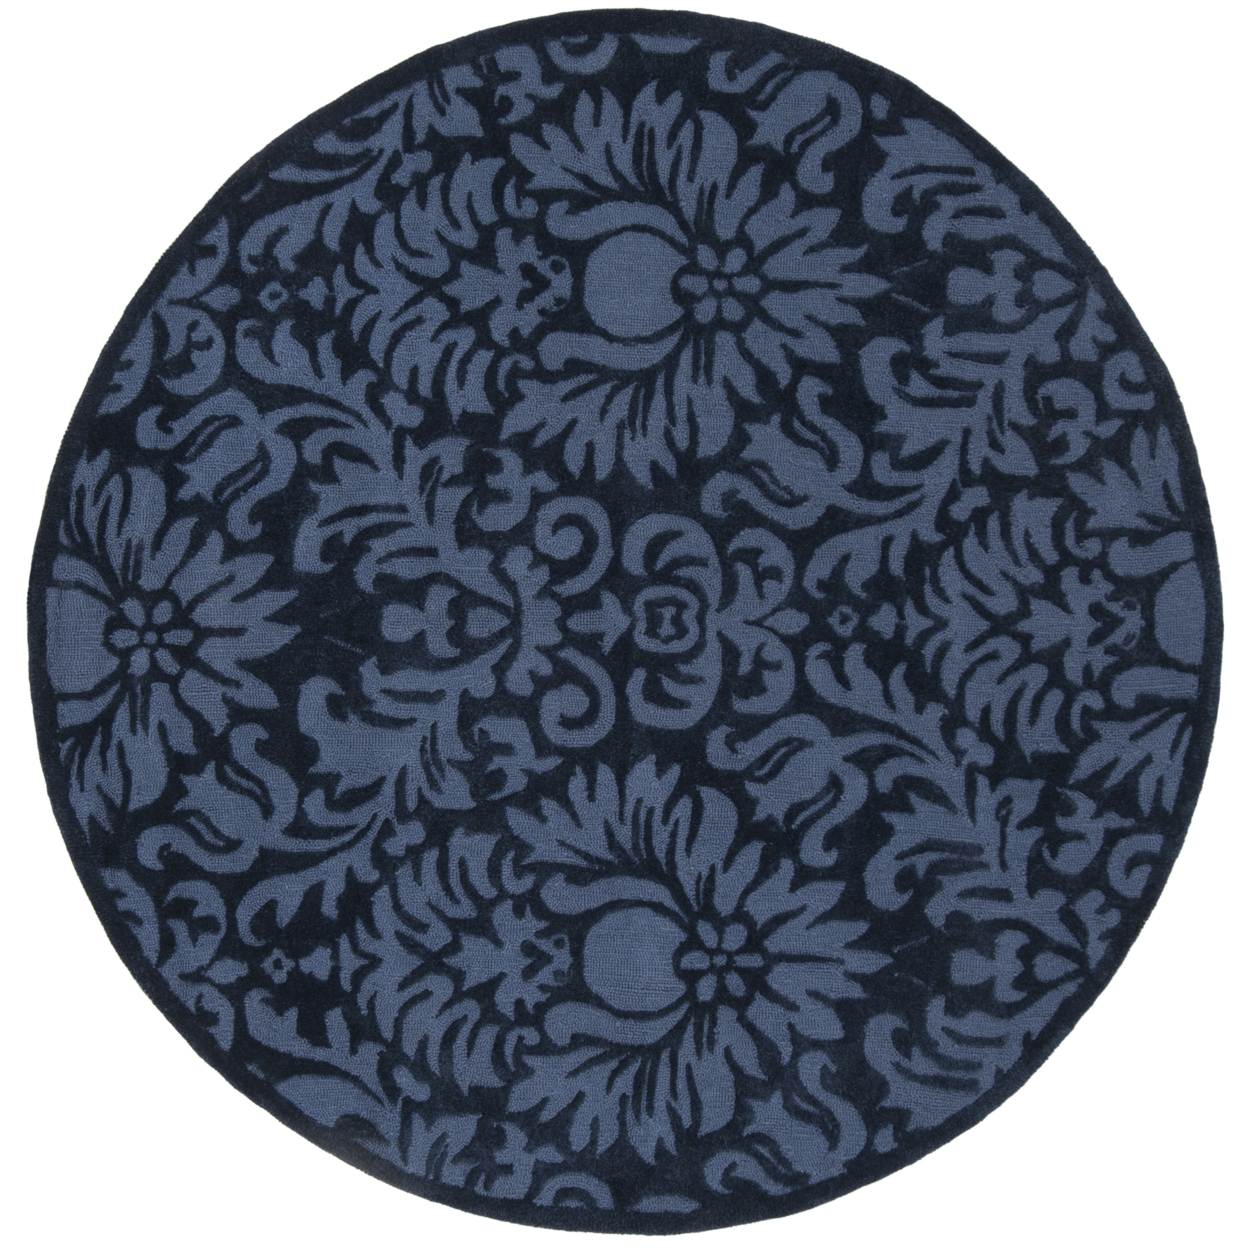 SAFAVIEH Total Performance TLP714I Hand-hooked Navy Rug - 8' Round